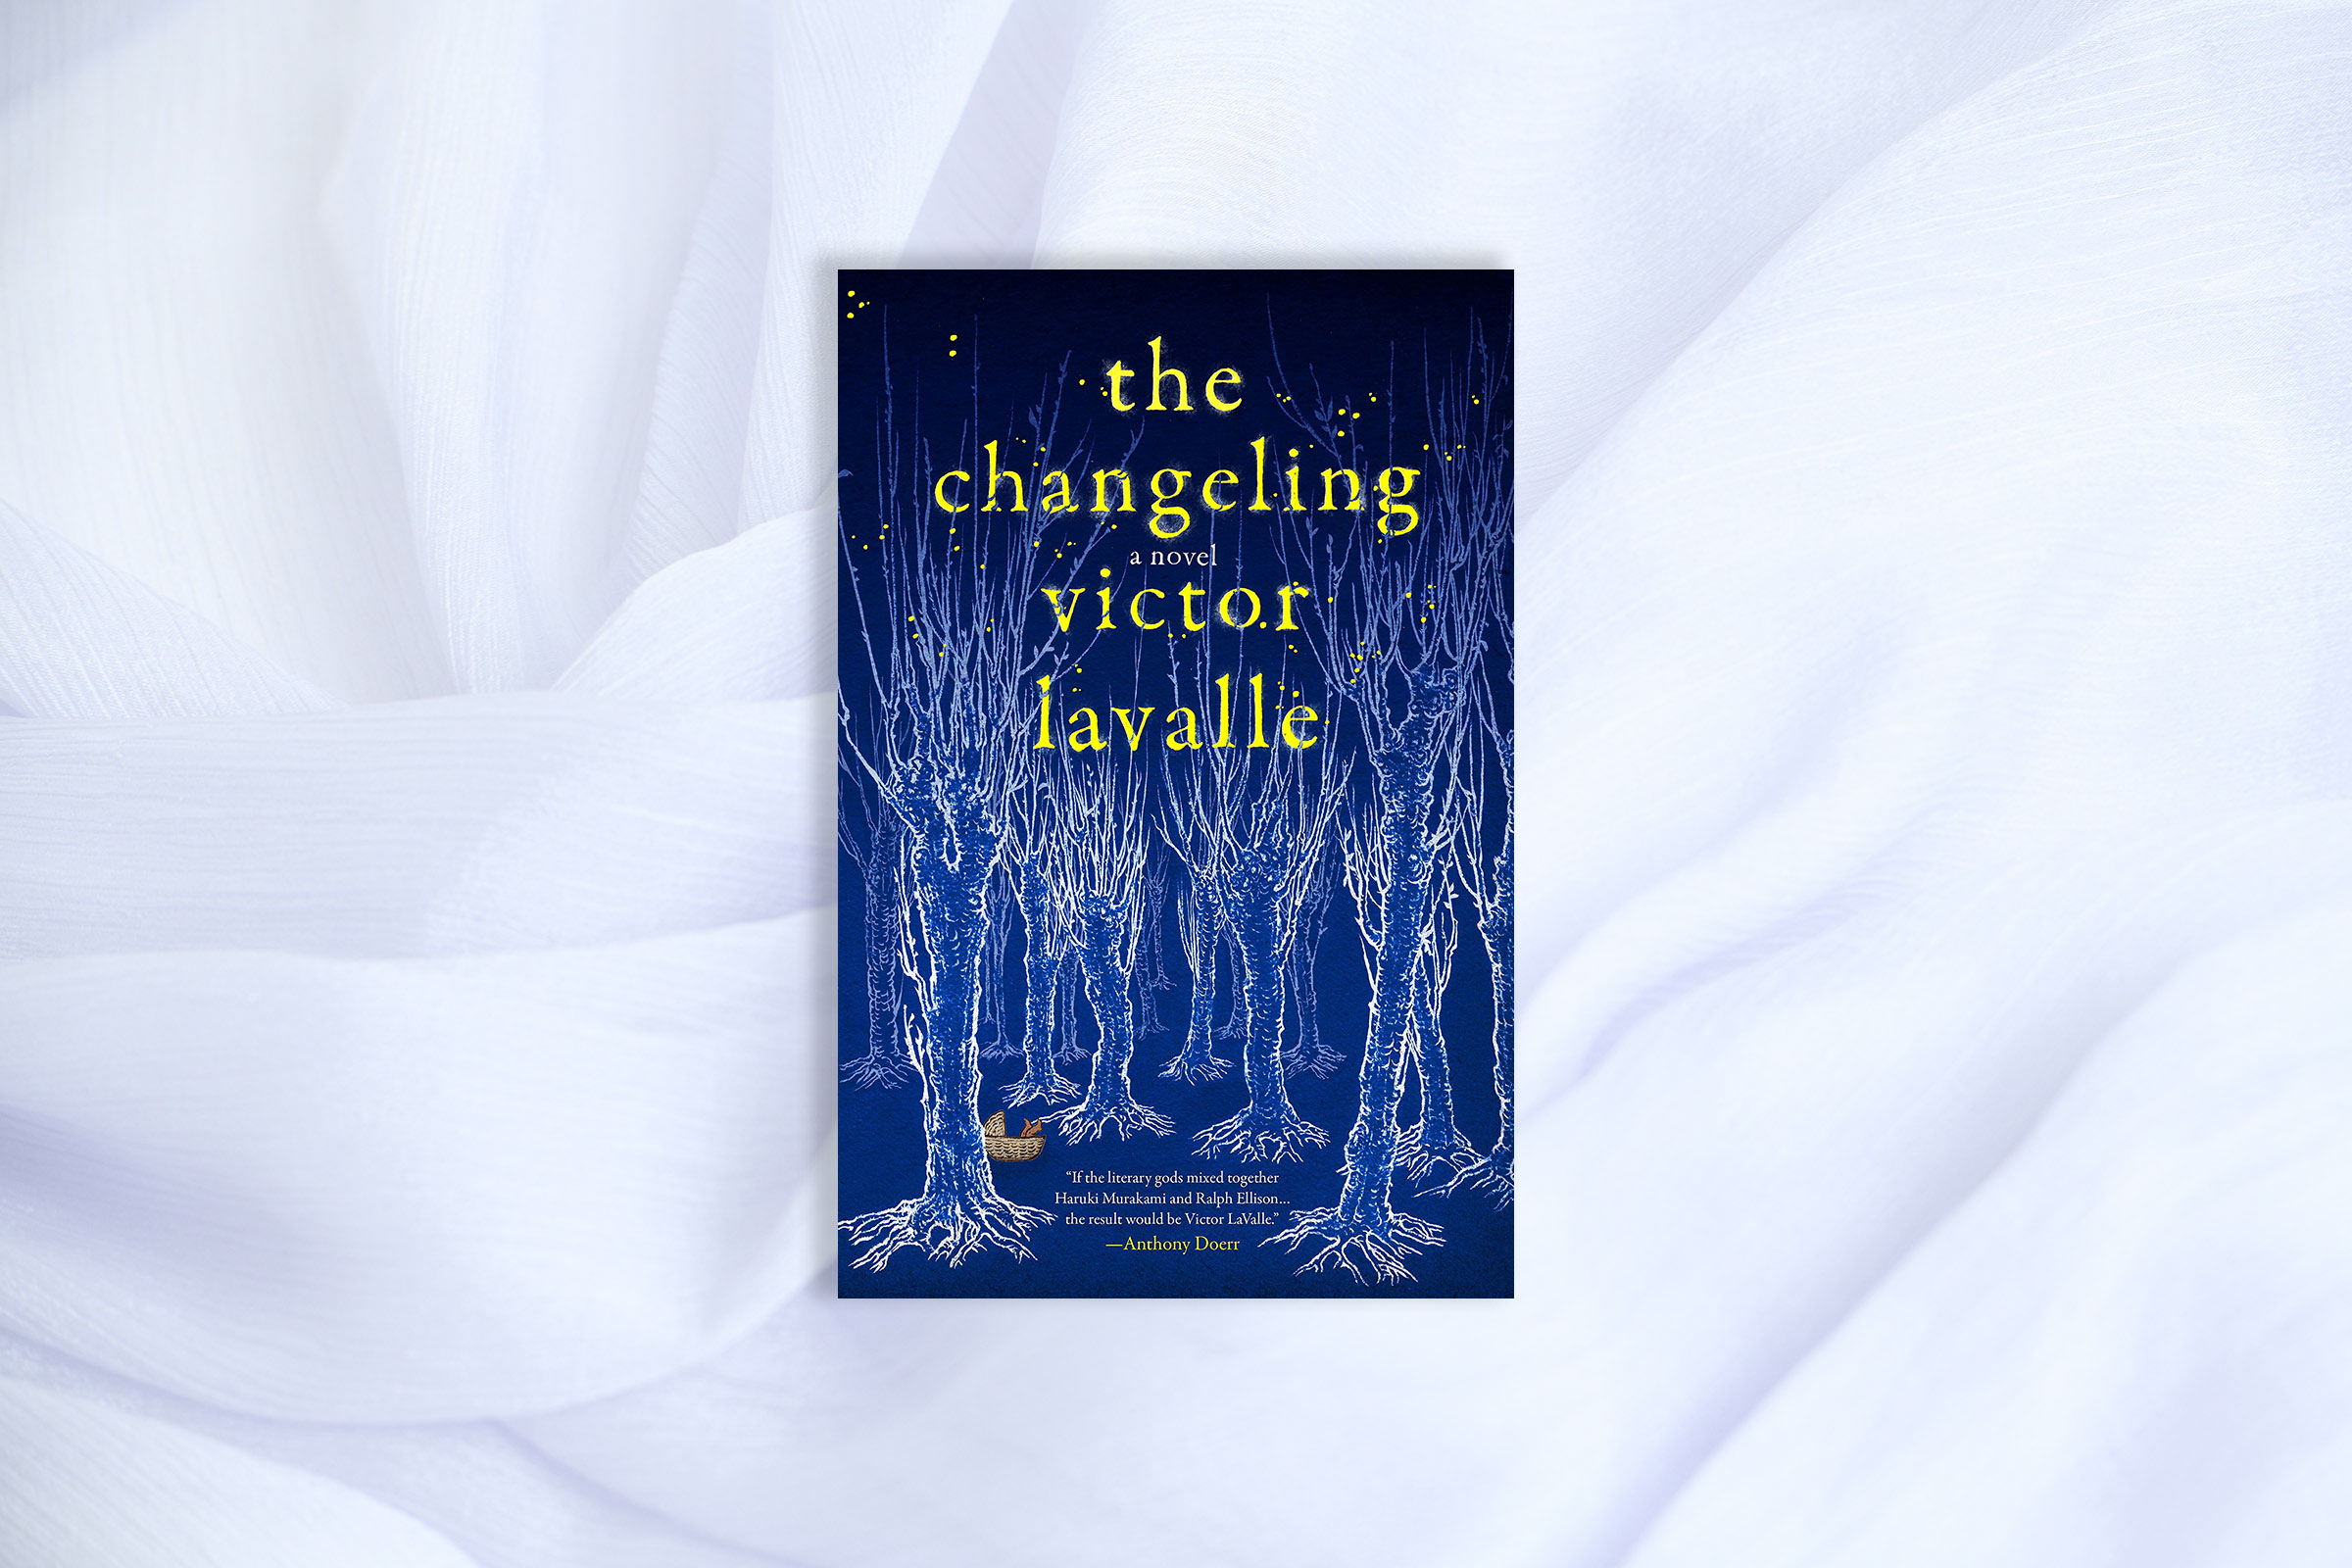 100 Best Fantasy Books: The Changeling Victor LaVelle